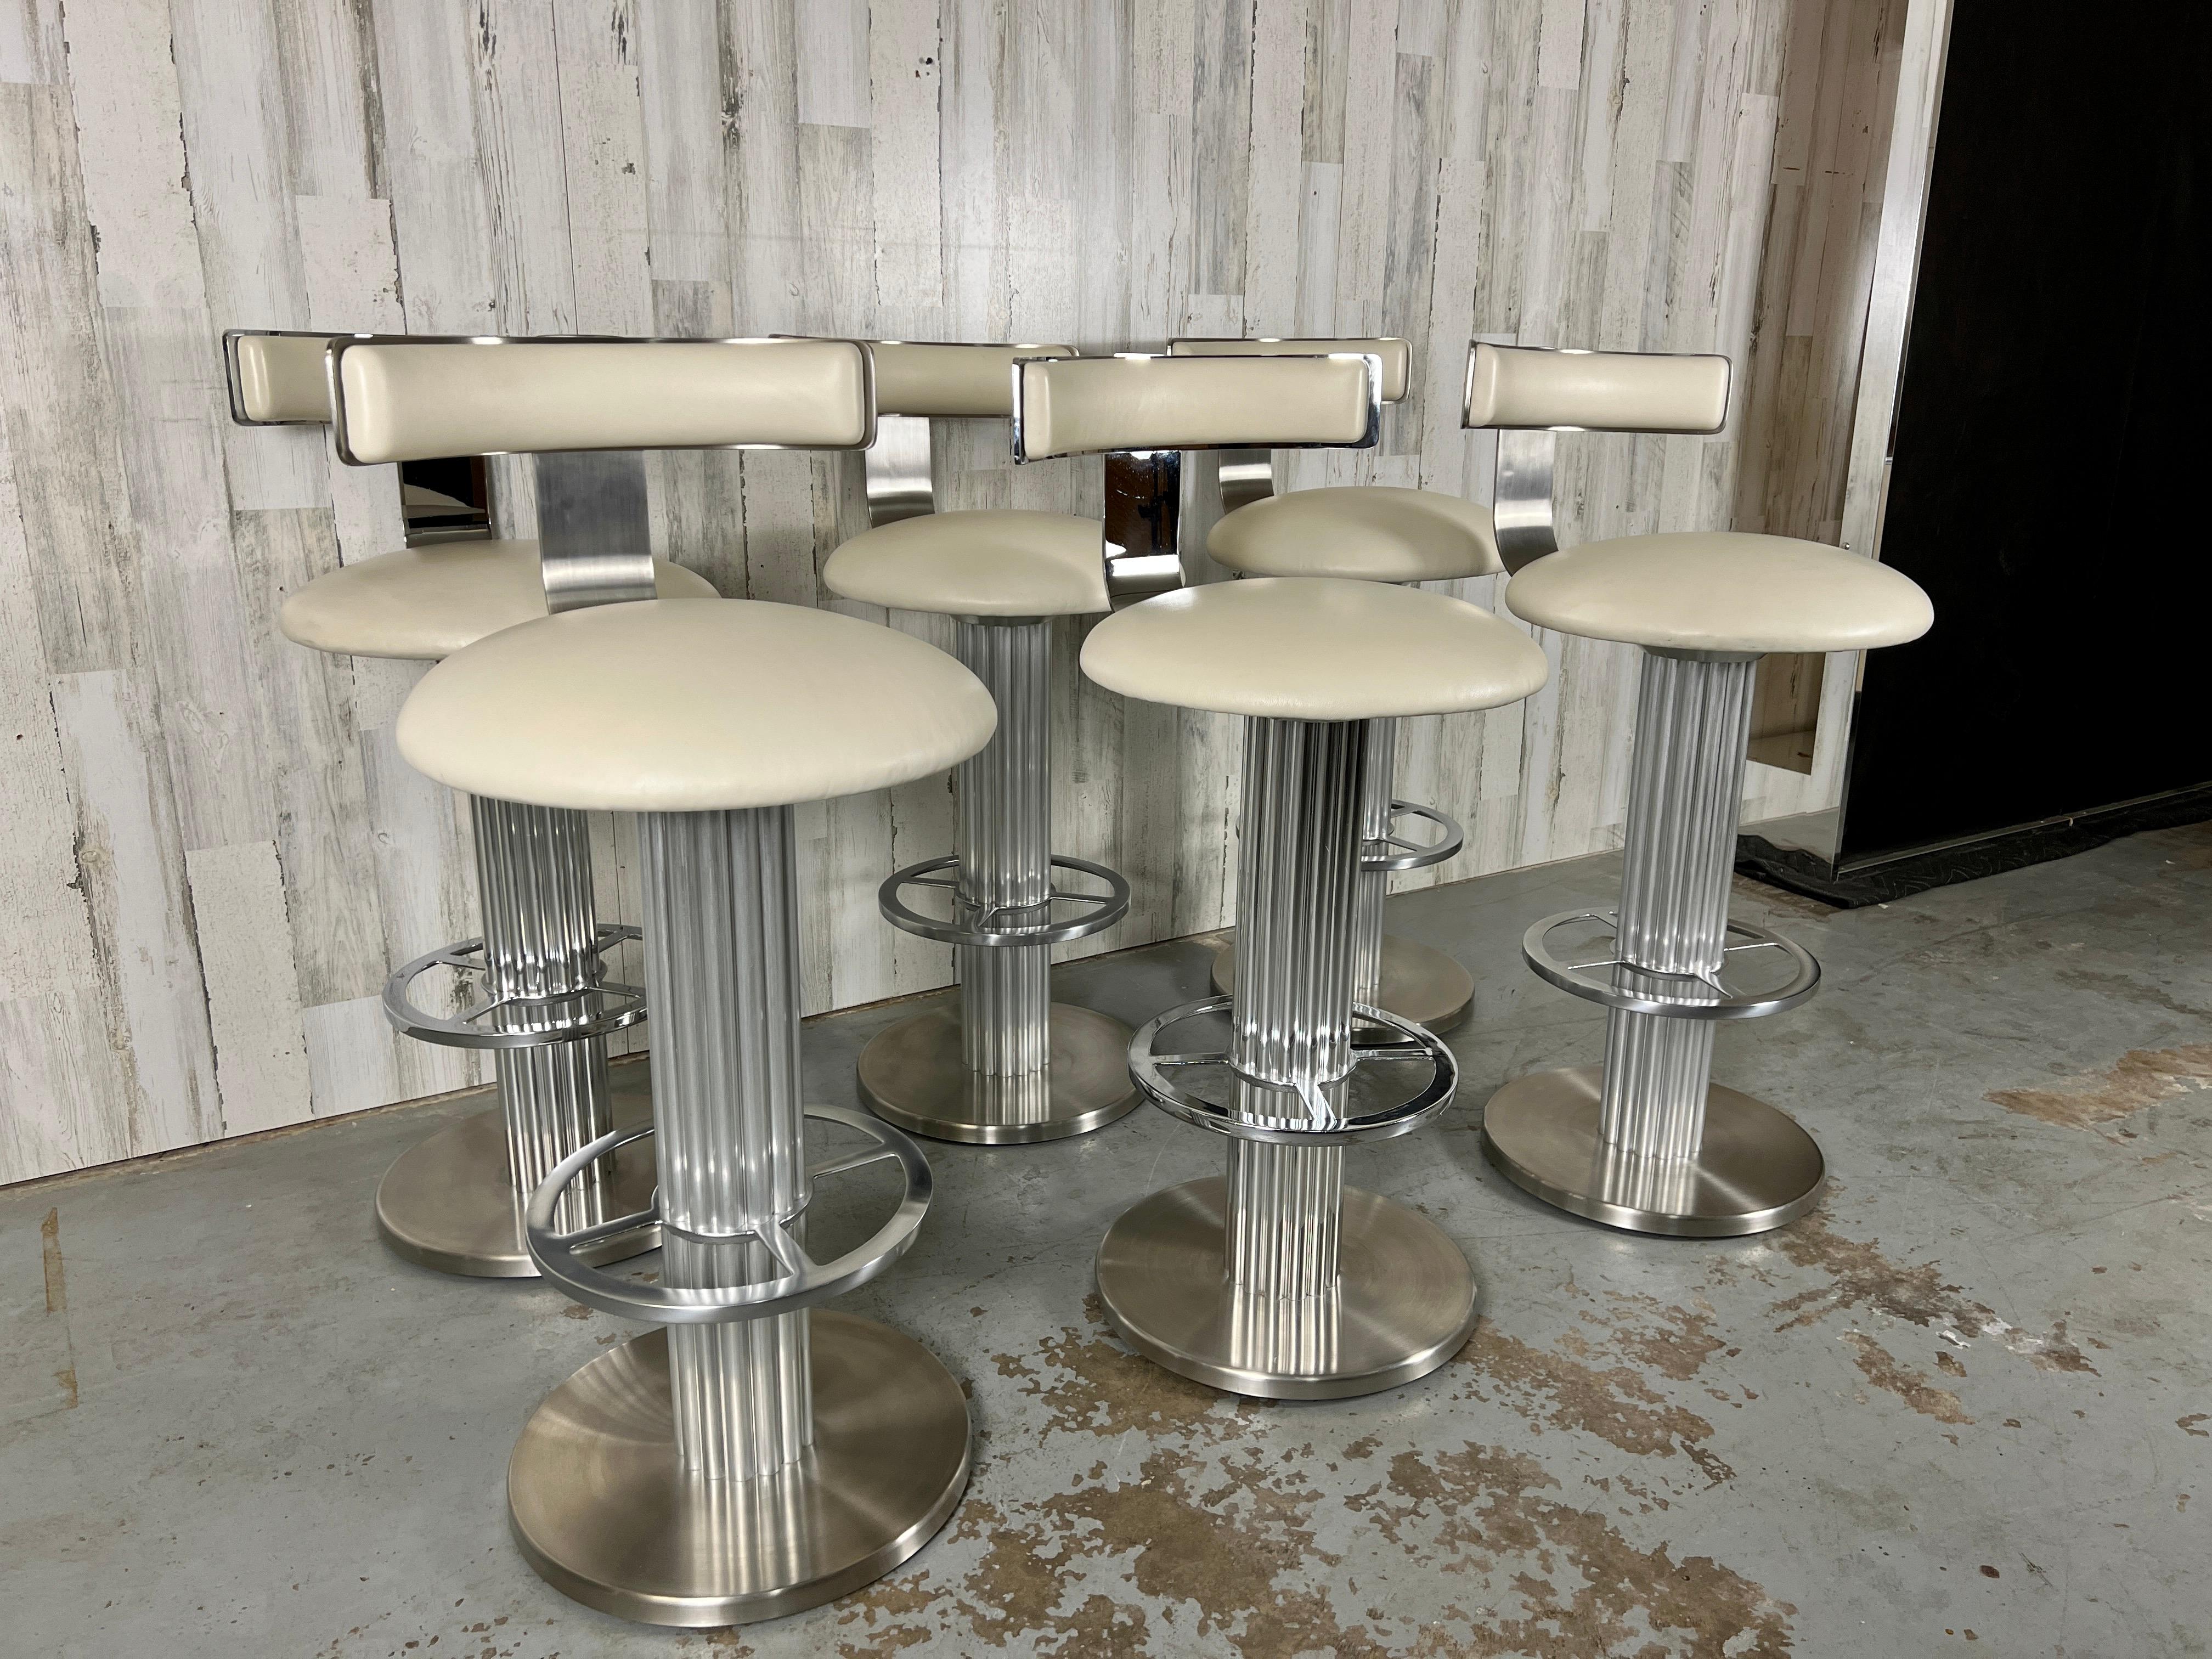 Modern Design For Leisure Brushed Stainless Steel Bar Stools, Set of 6